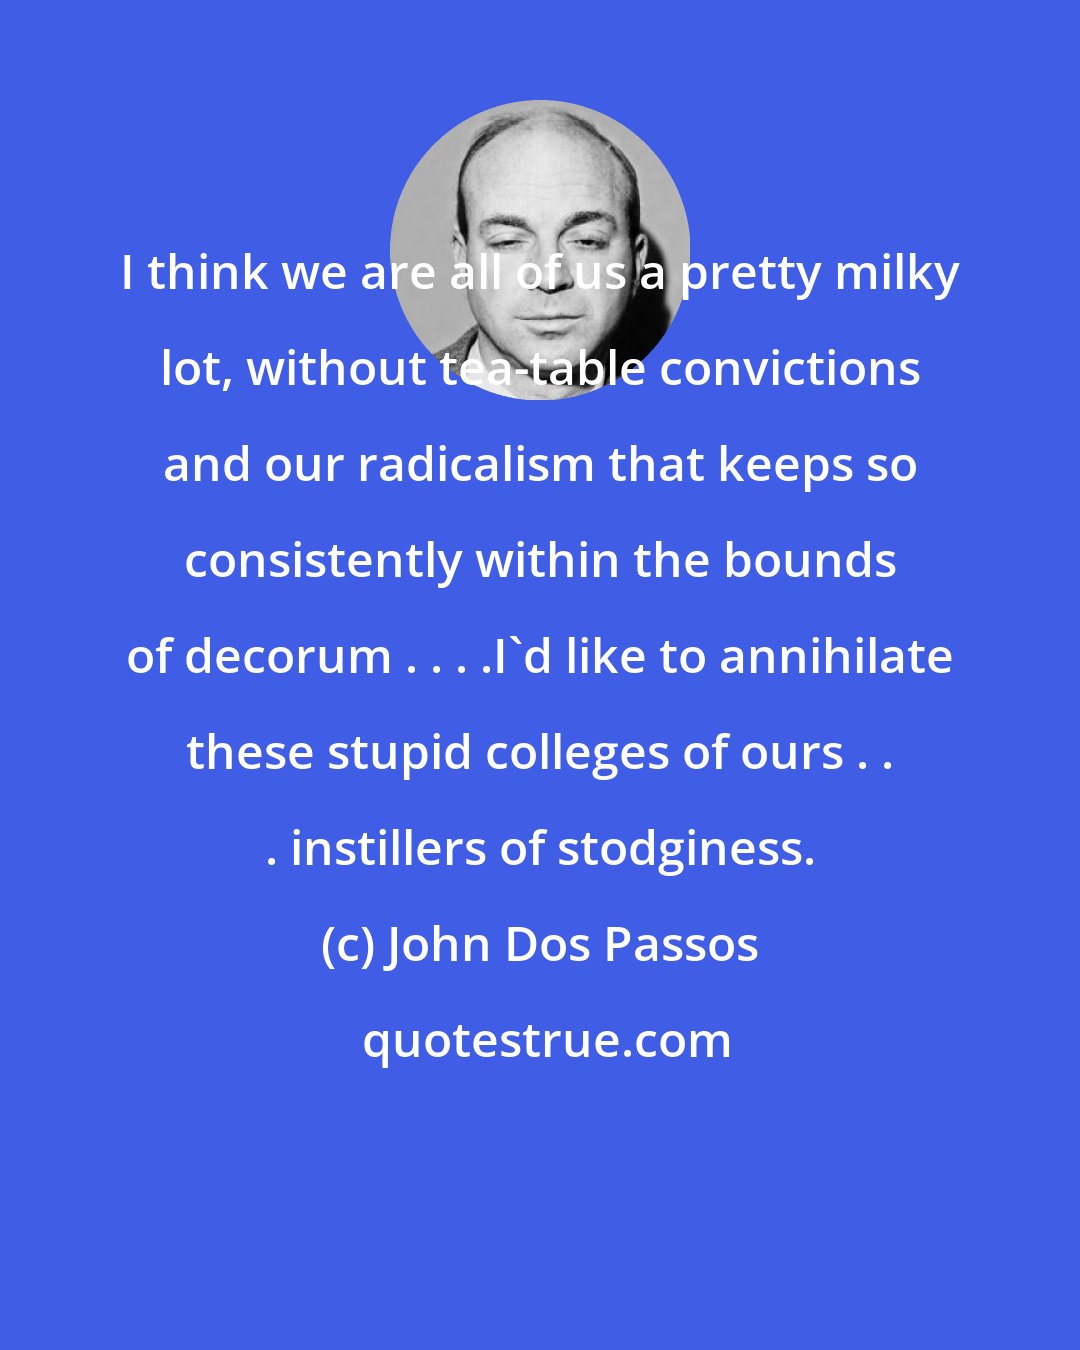 John Dos Passos: I think we are all of us a pretty milky lot, without tea-table convictions and our radicalism that keeps so consistently within the bounds of decorum . . . .I'd like to annihilate these stupid colleges of ours . . . instillers of stodginess.